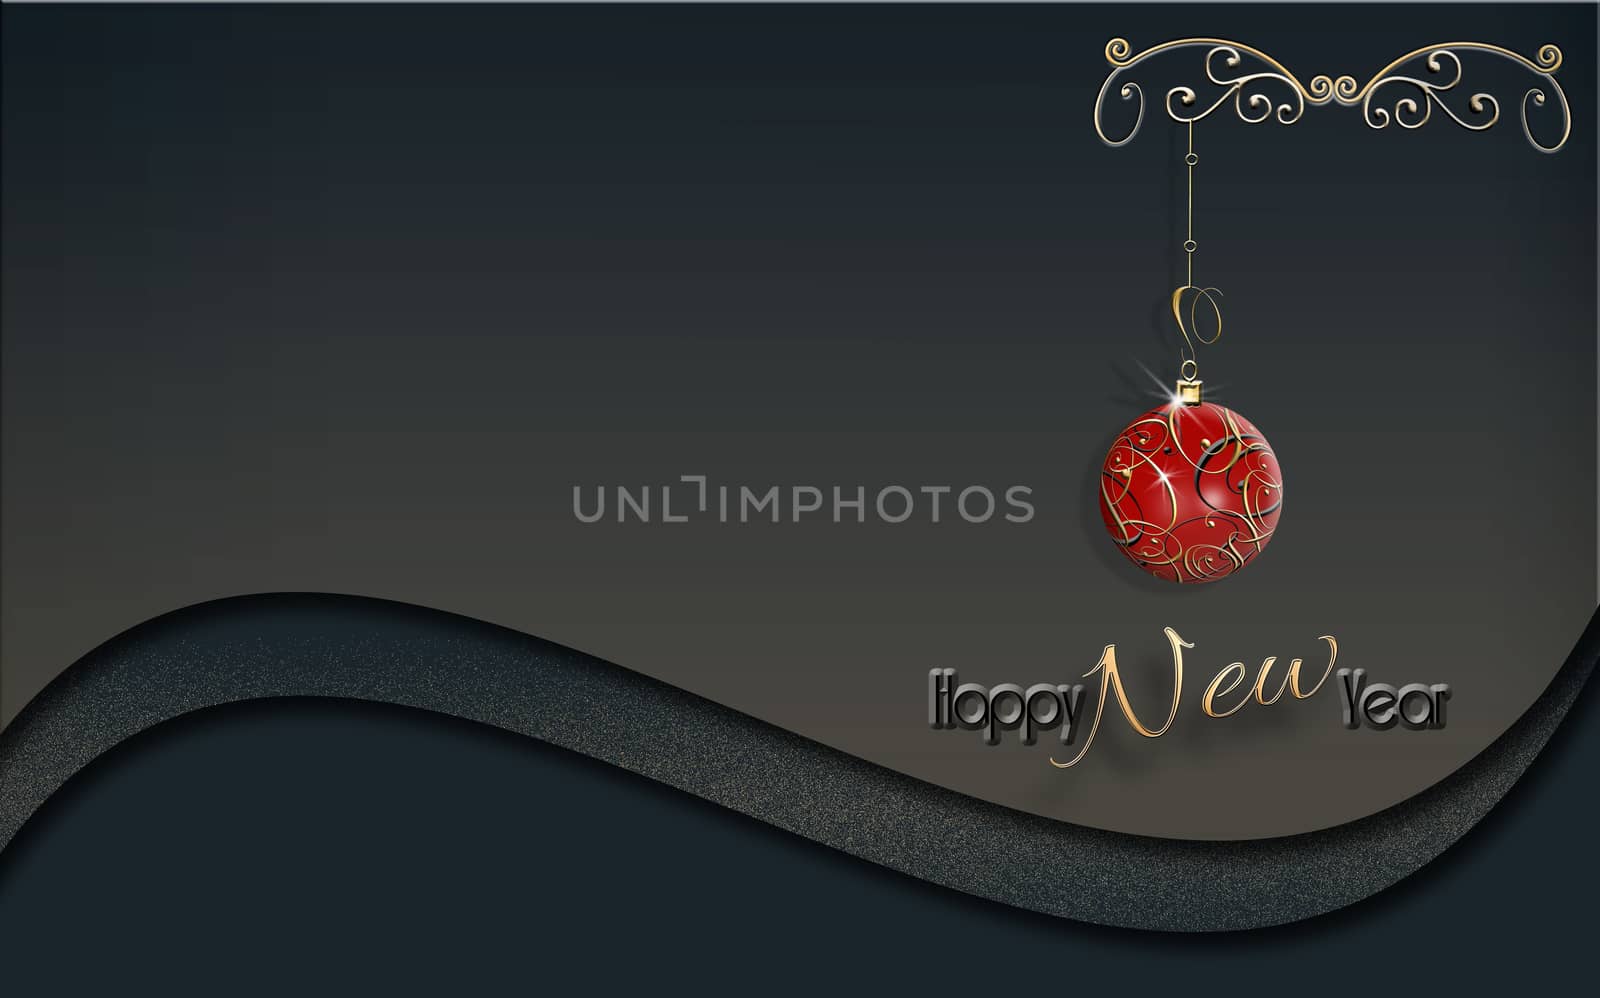 Happy New Year 2021 Christmas and New Year holidays background by NelliPolk